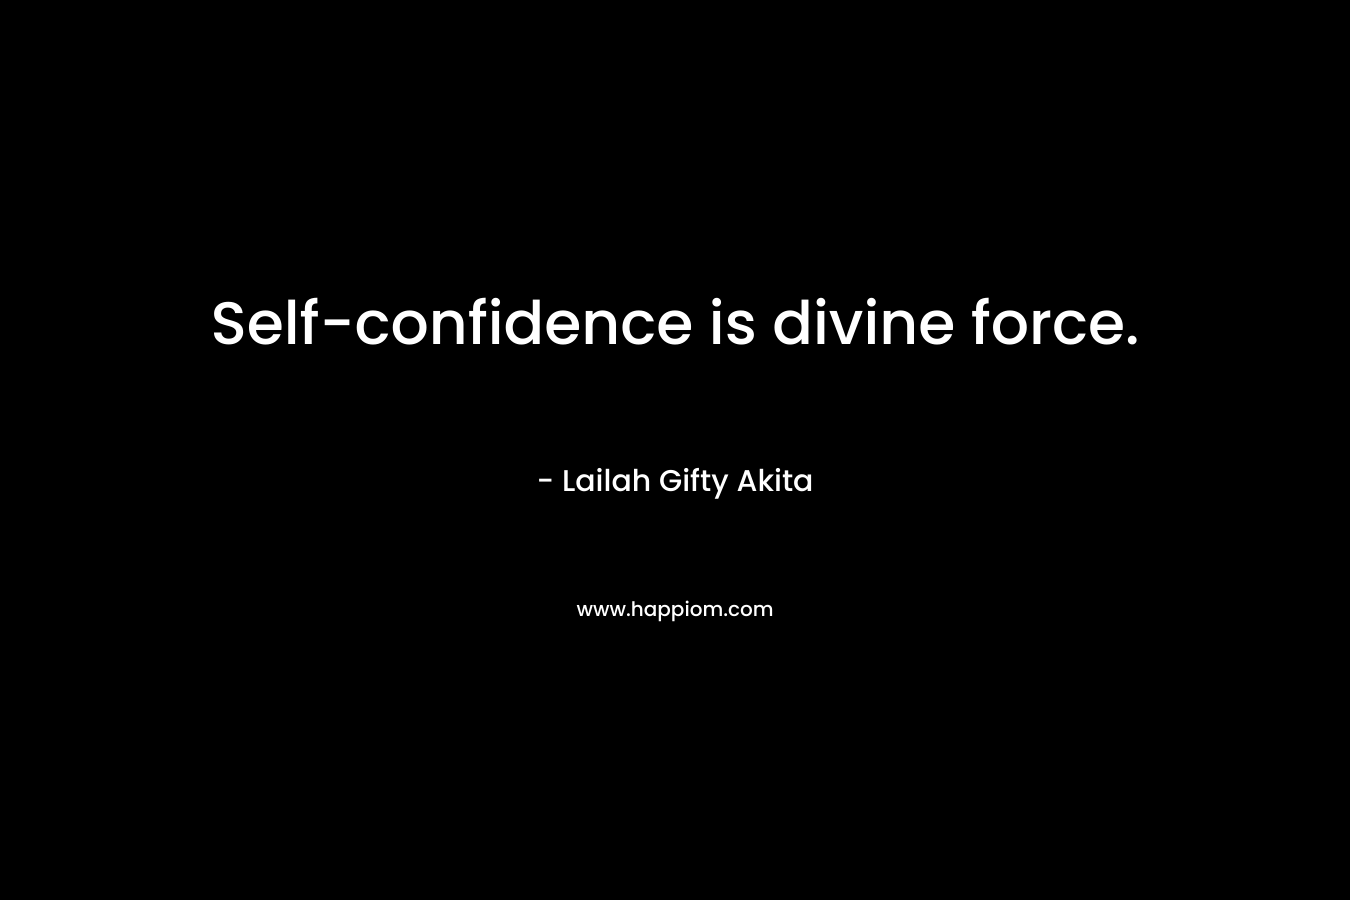 Self-confidence is divine force.